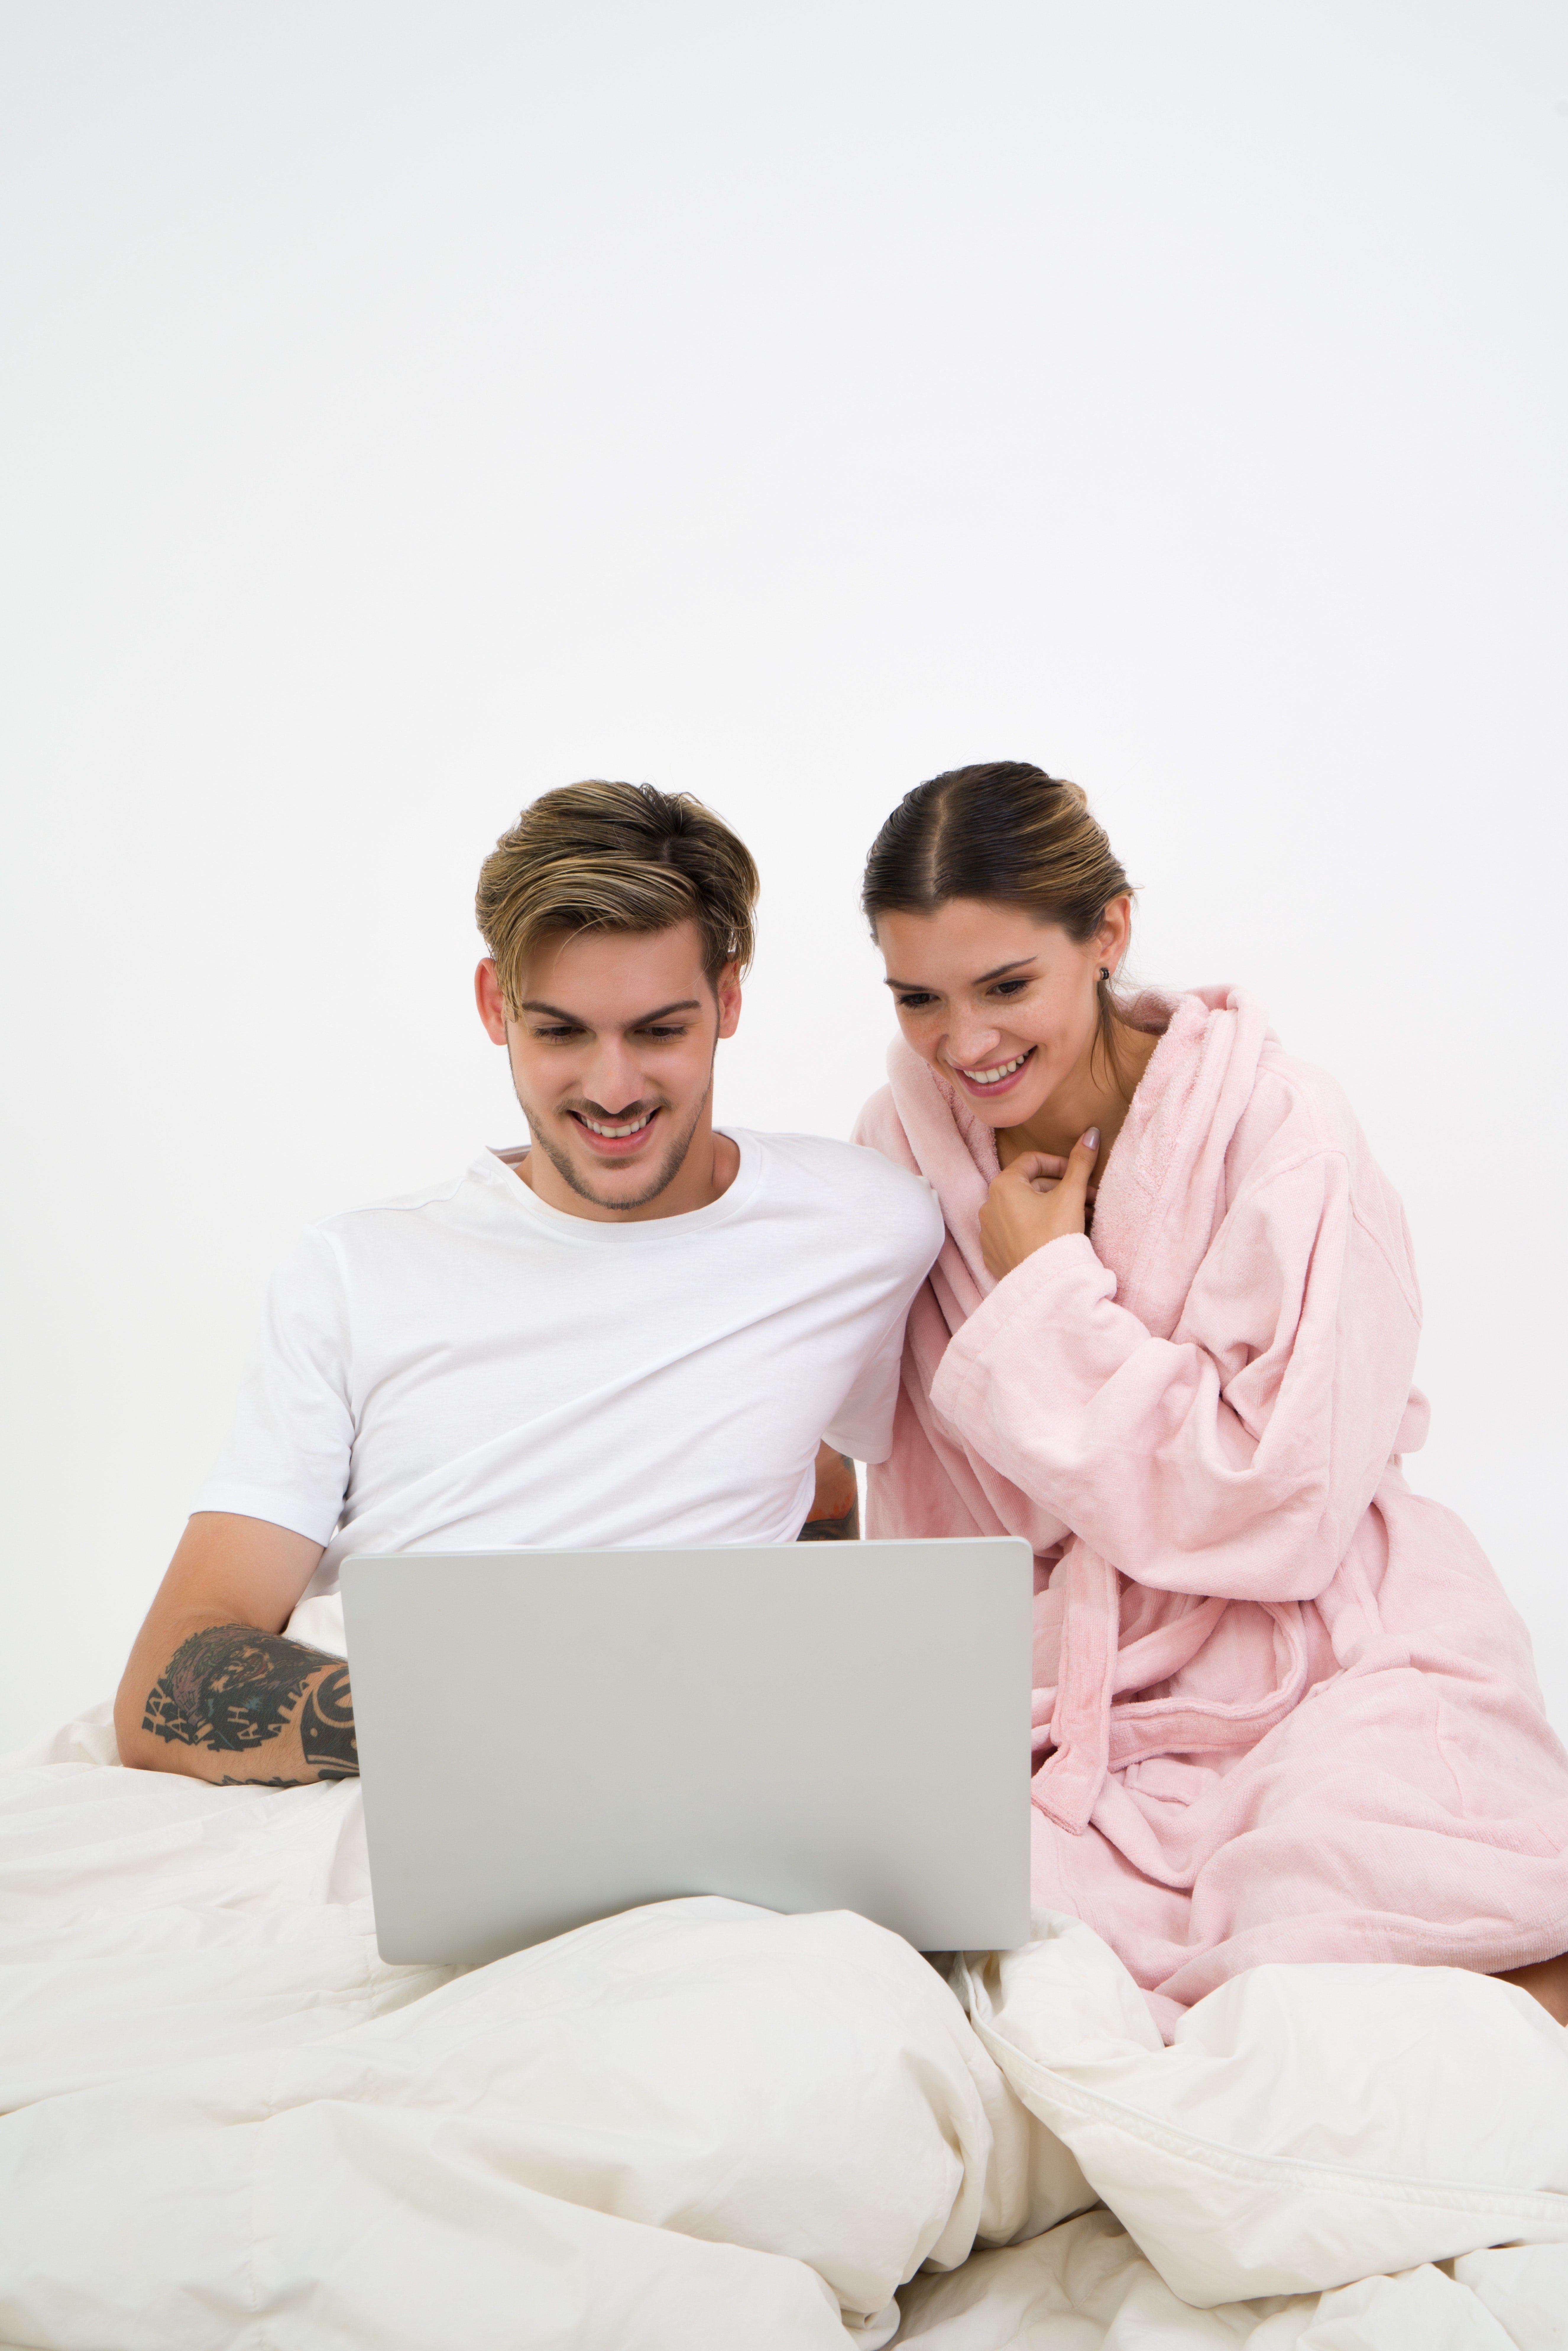 Pictured - A man and a woman sitting on the bed looking at the laptop | Source: Pexels 